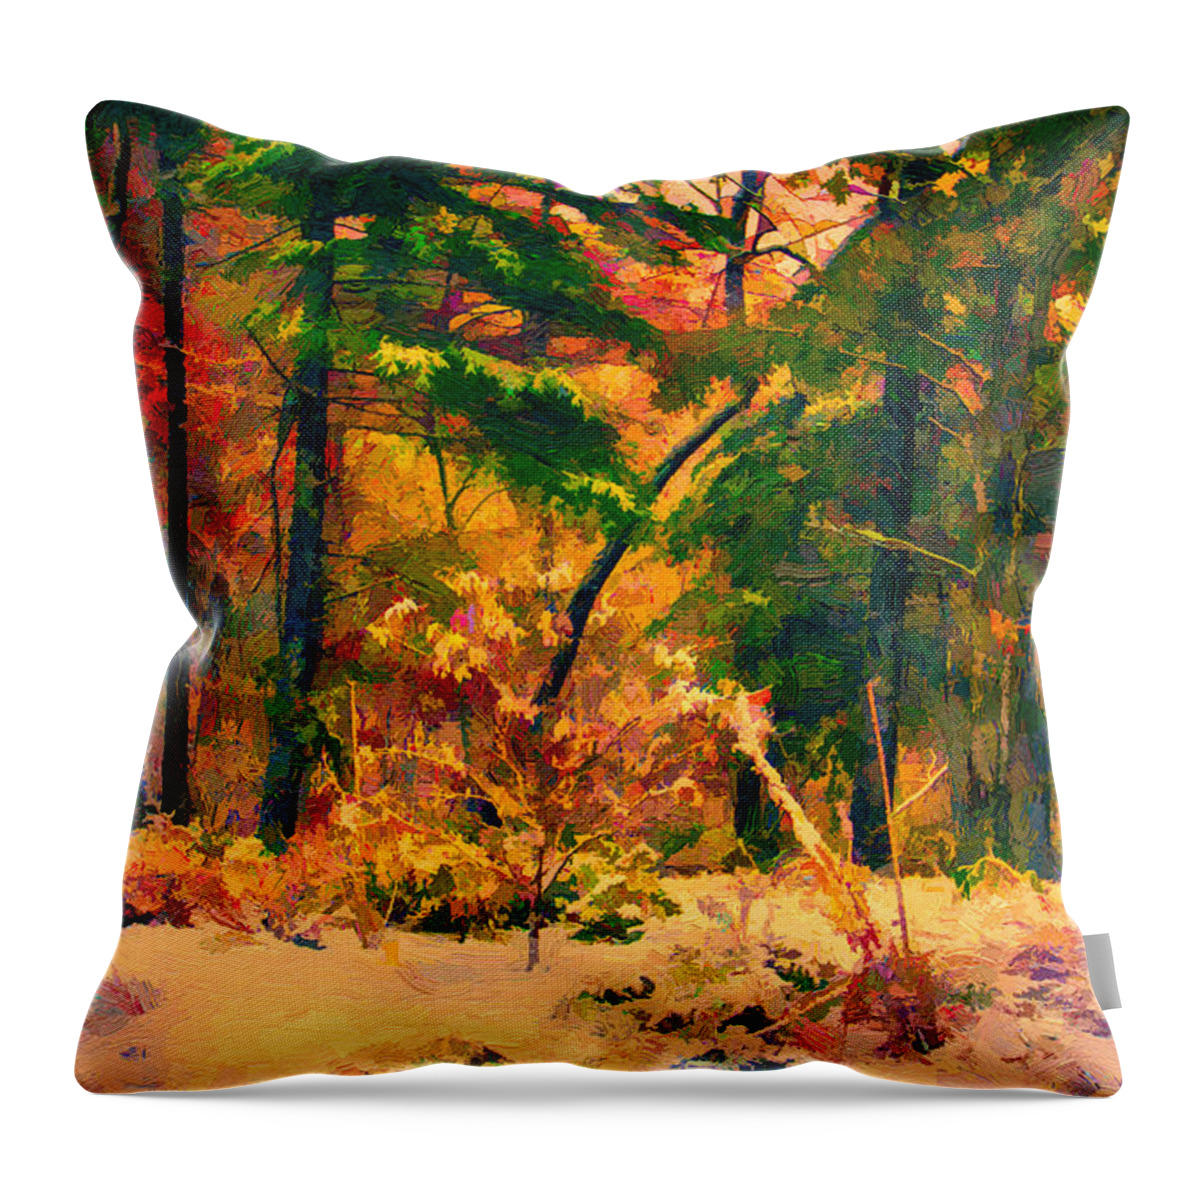 Appalachian Mountains Throw Pillow featuring the painting When Fall Becomes Winter by John Haldane